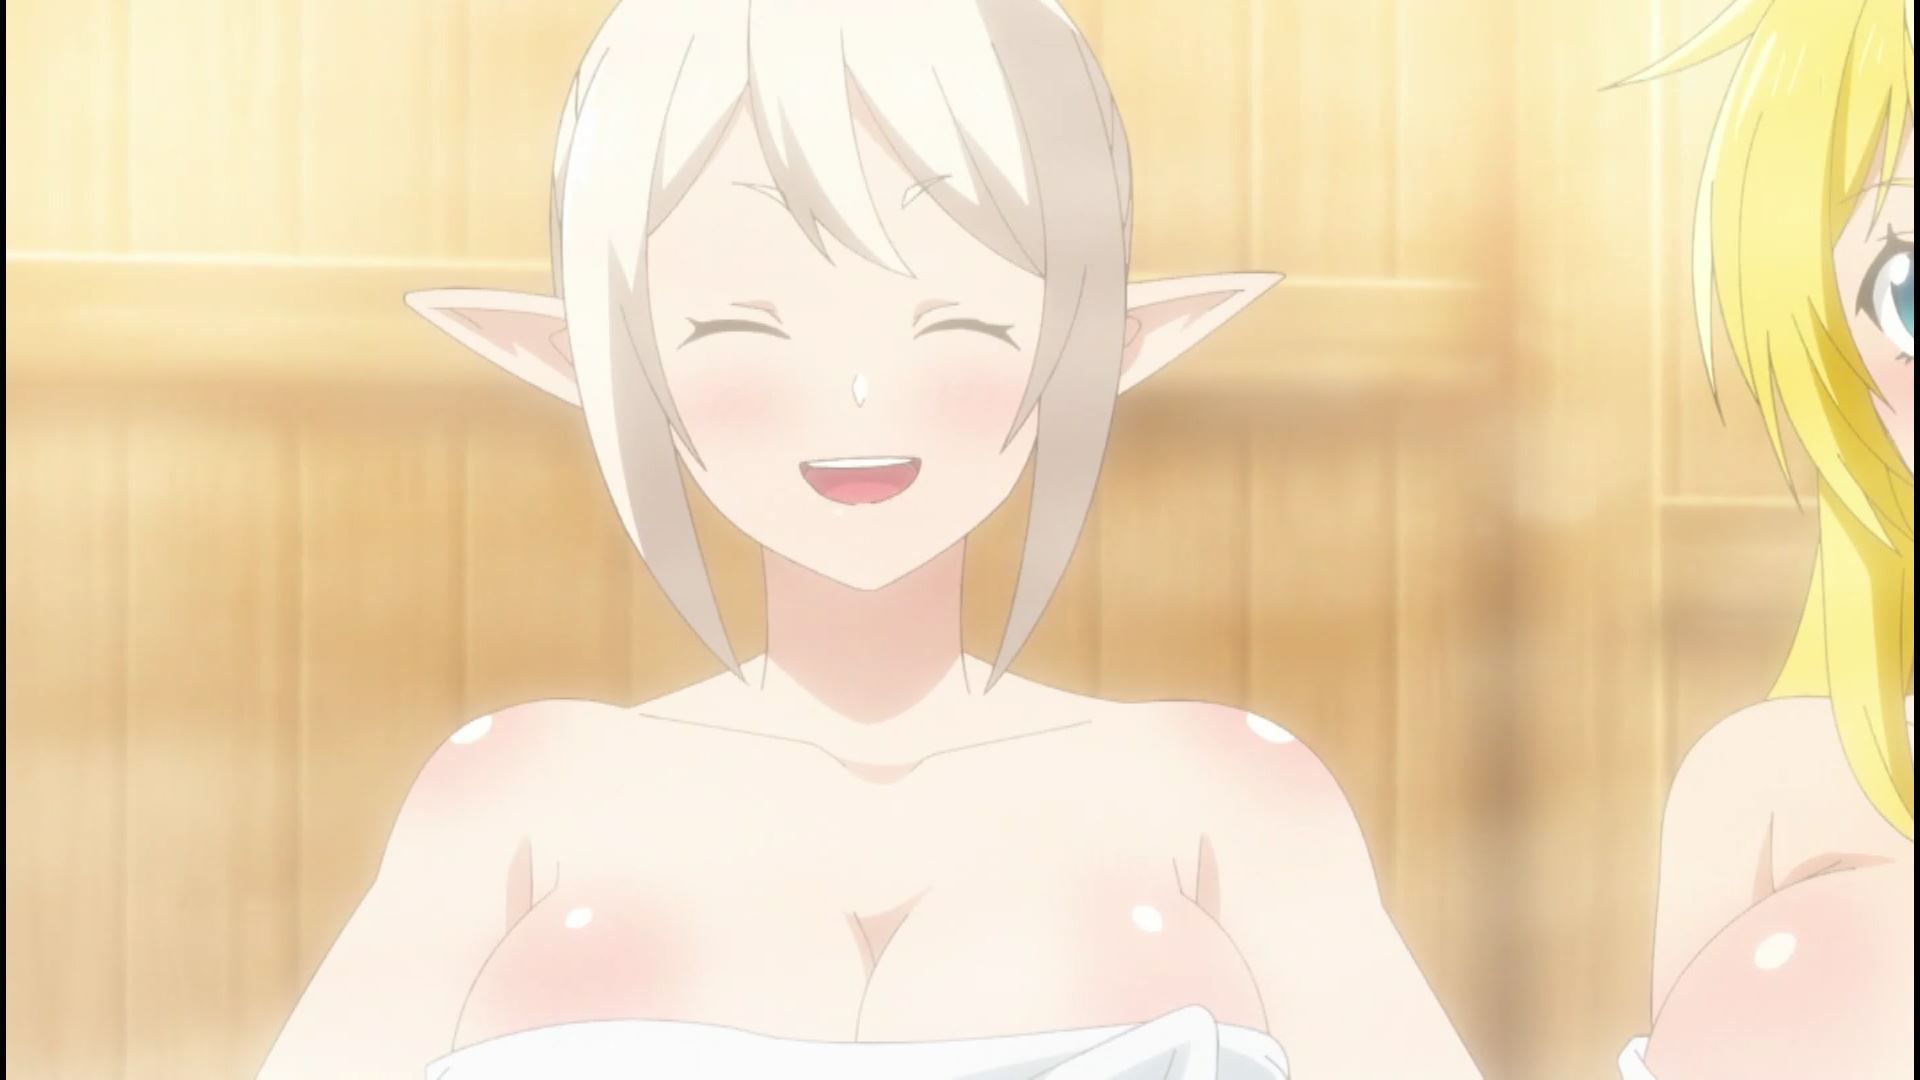 In episode 4 of the anime "True Companion", there is an erotic scene where you enter the sauna naked with an erotic boob girl! 14